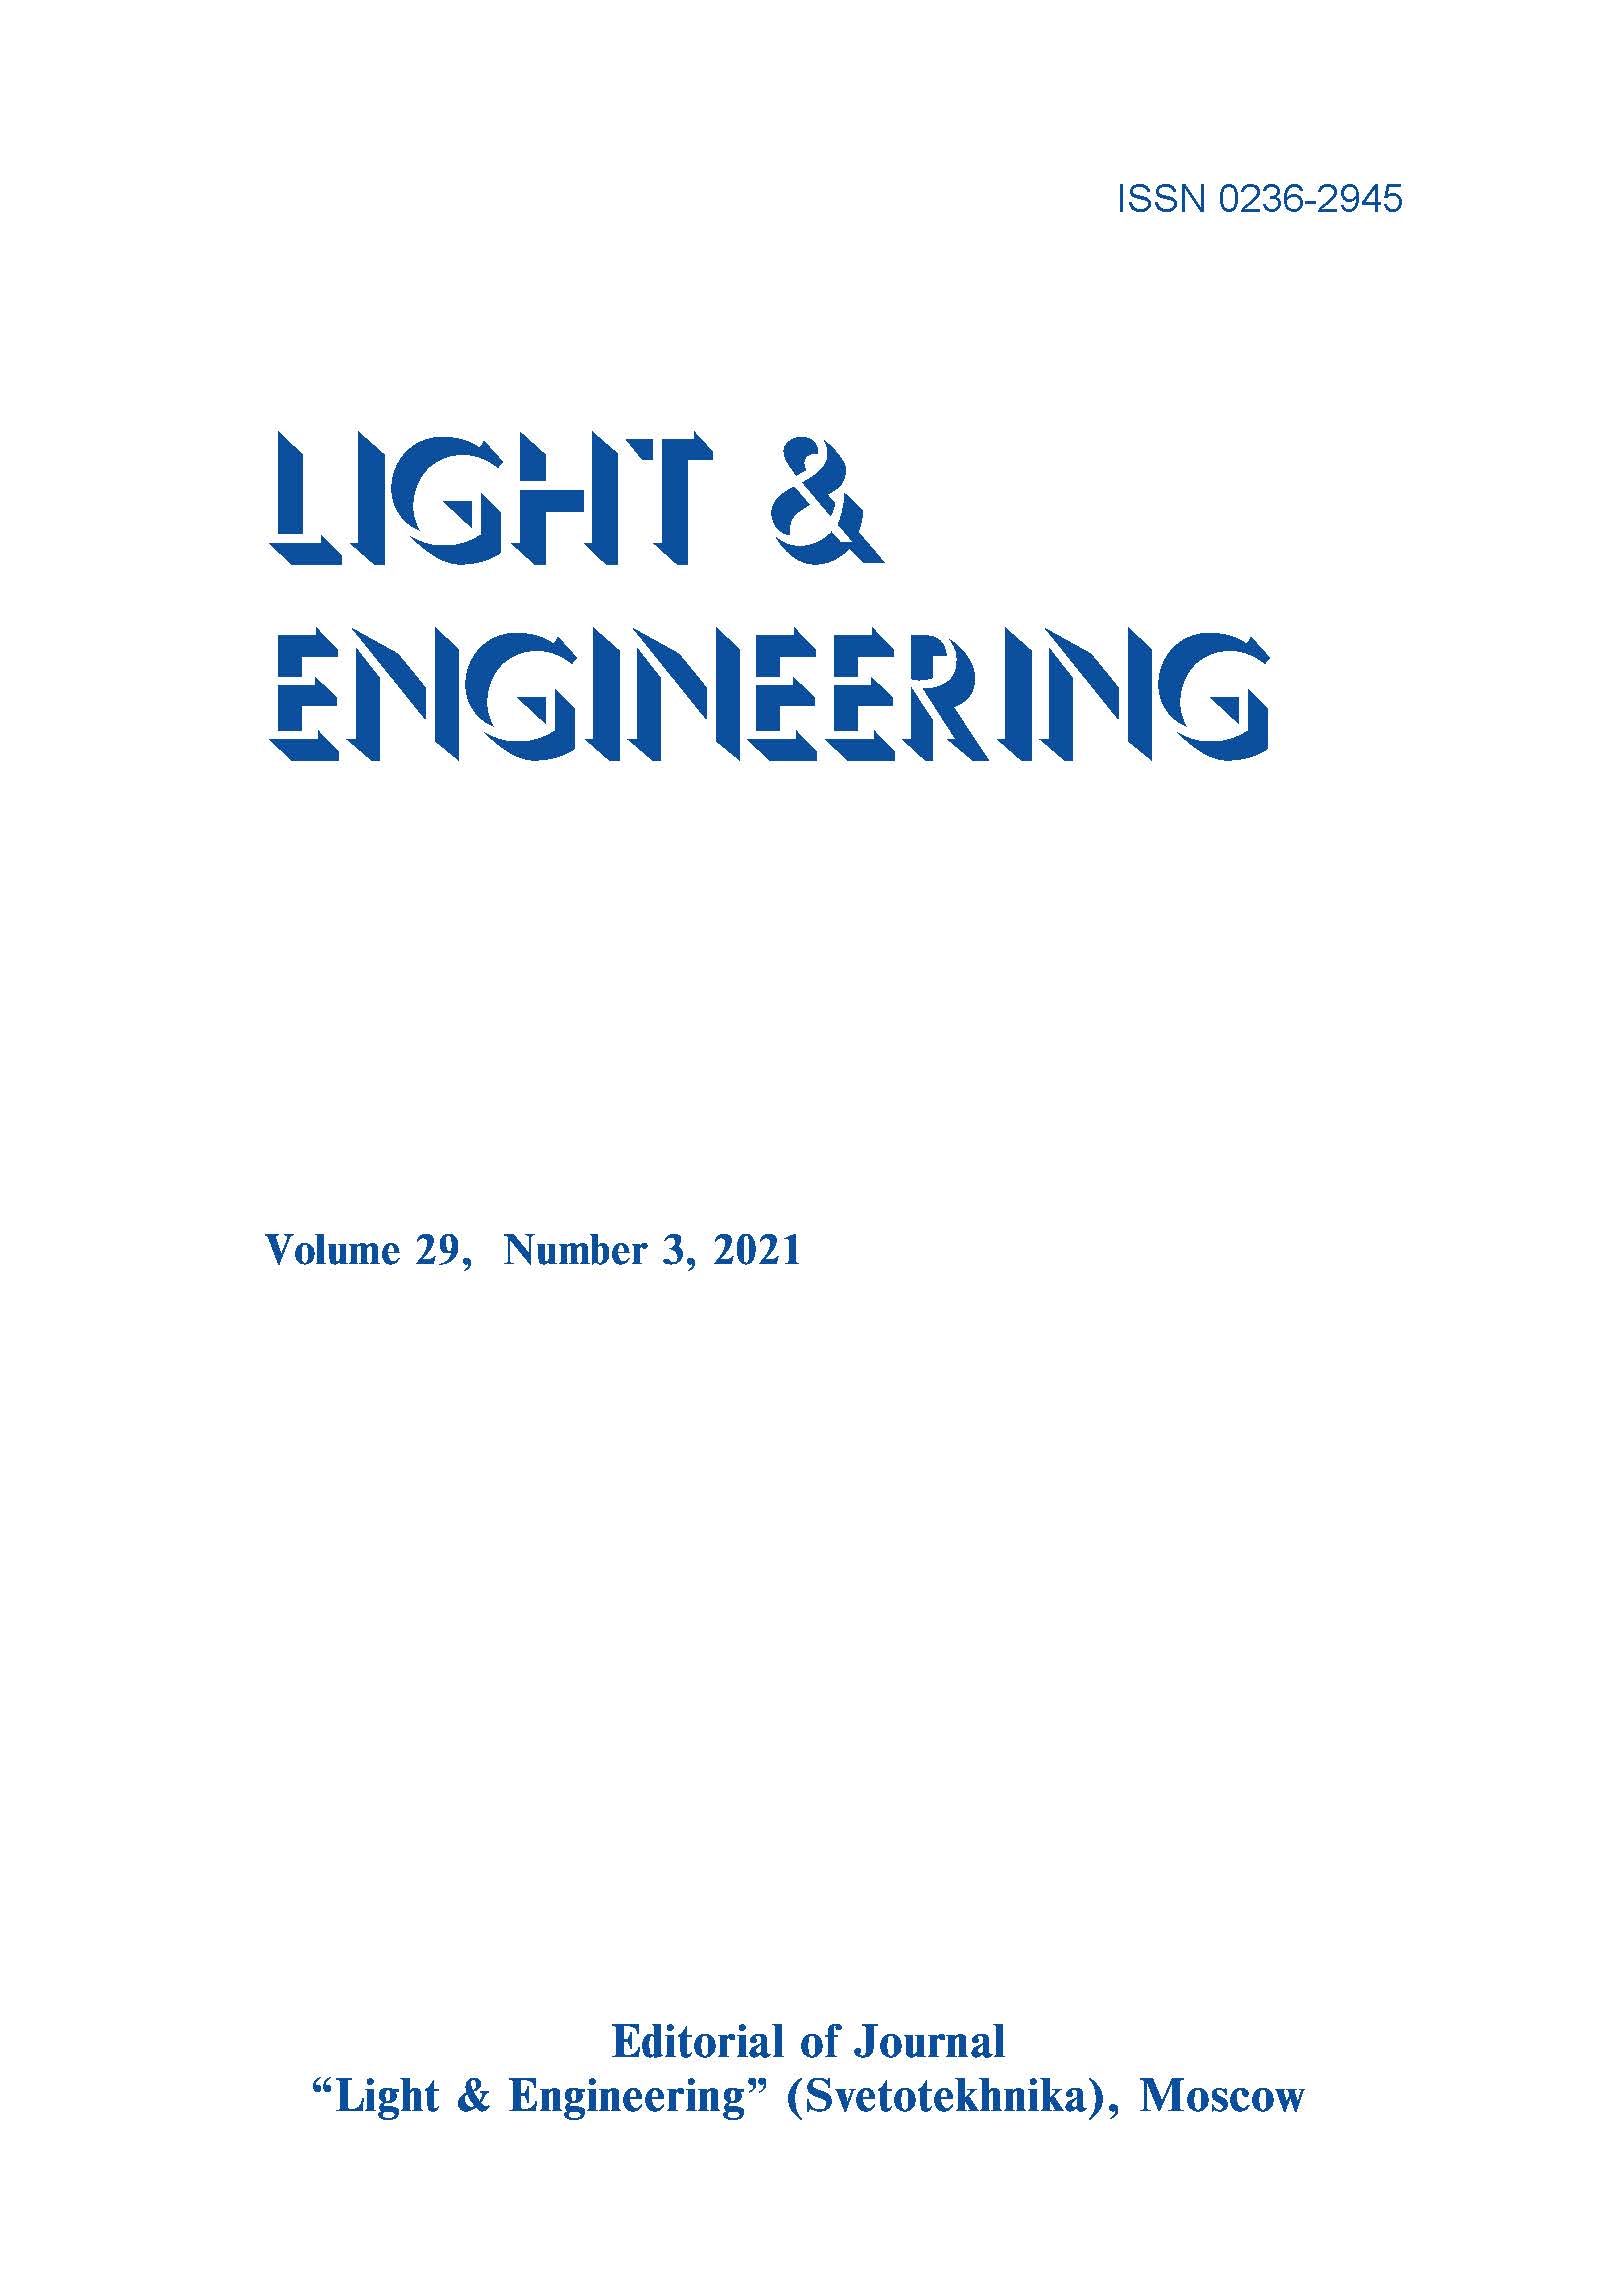 Effects Of Spectral Tuning Of White Light on Attention Level And Sleep Quality L&E, Vol. 29, No. 3, 2021